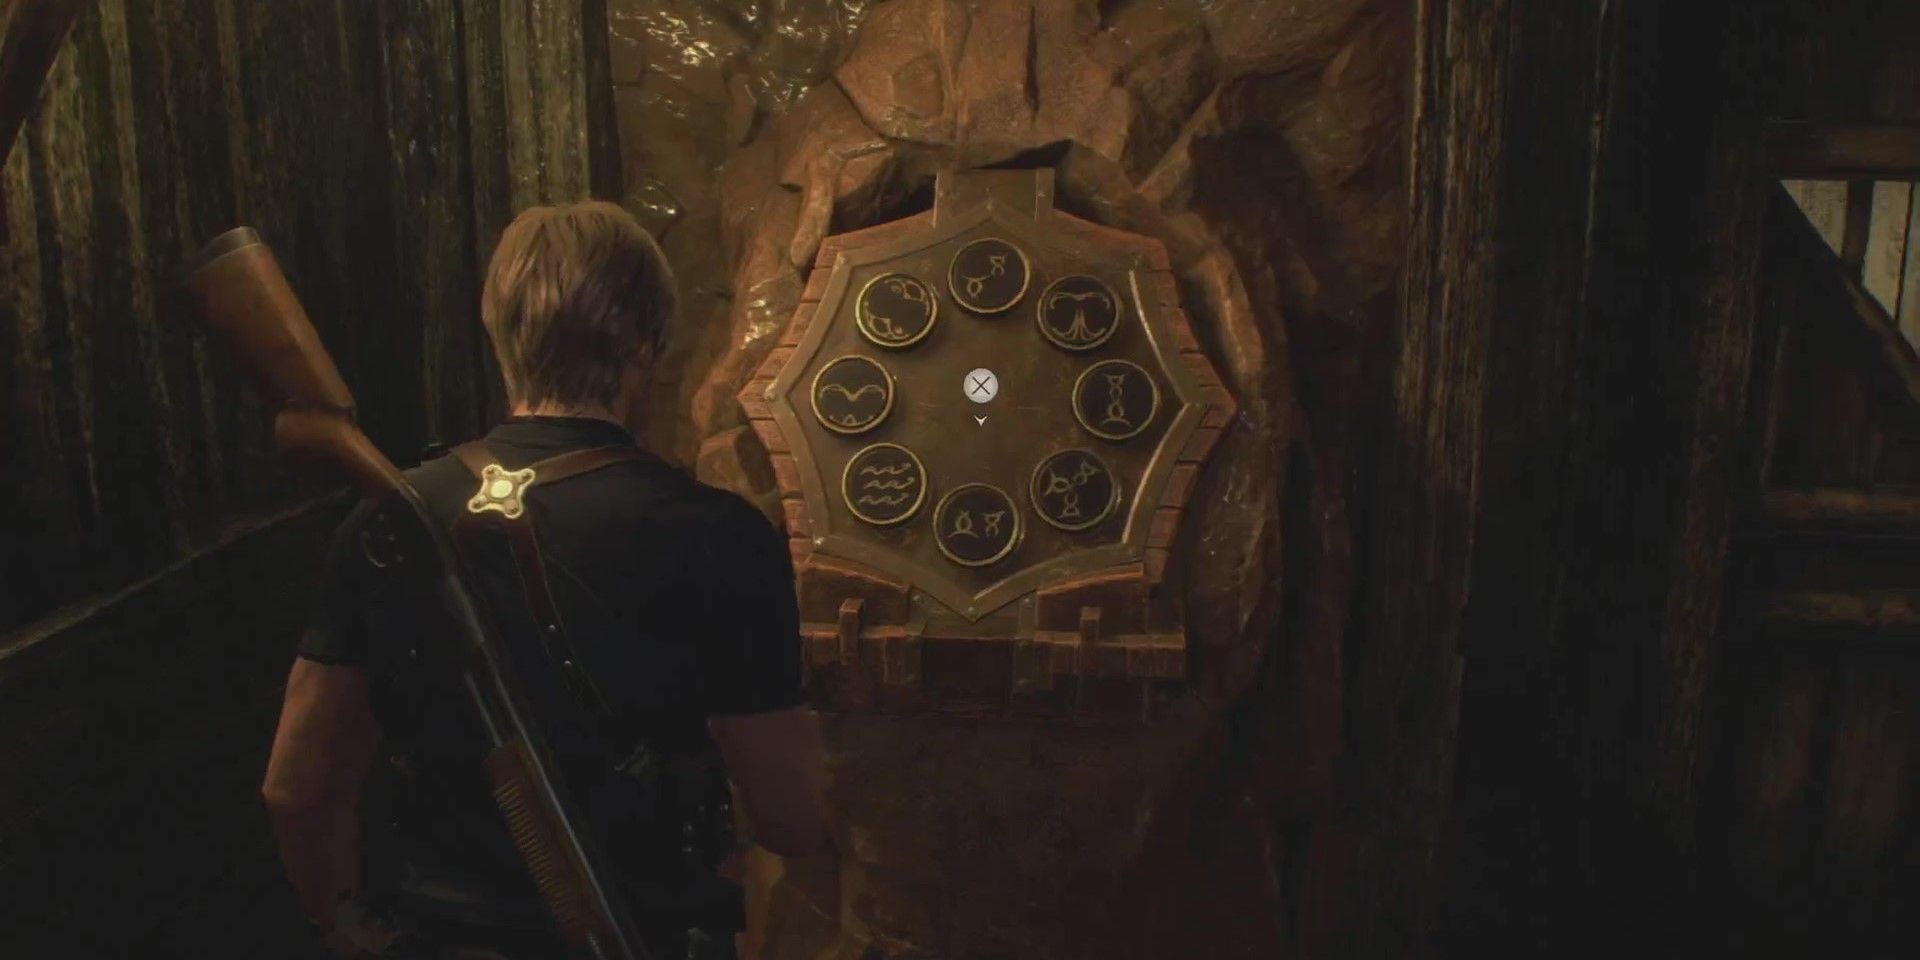 Resident Evil 4 Remake - All Puzzles Solutions Solved 